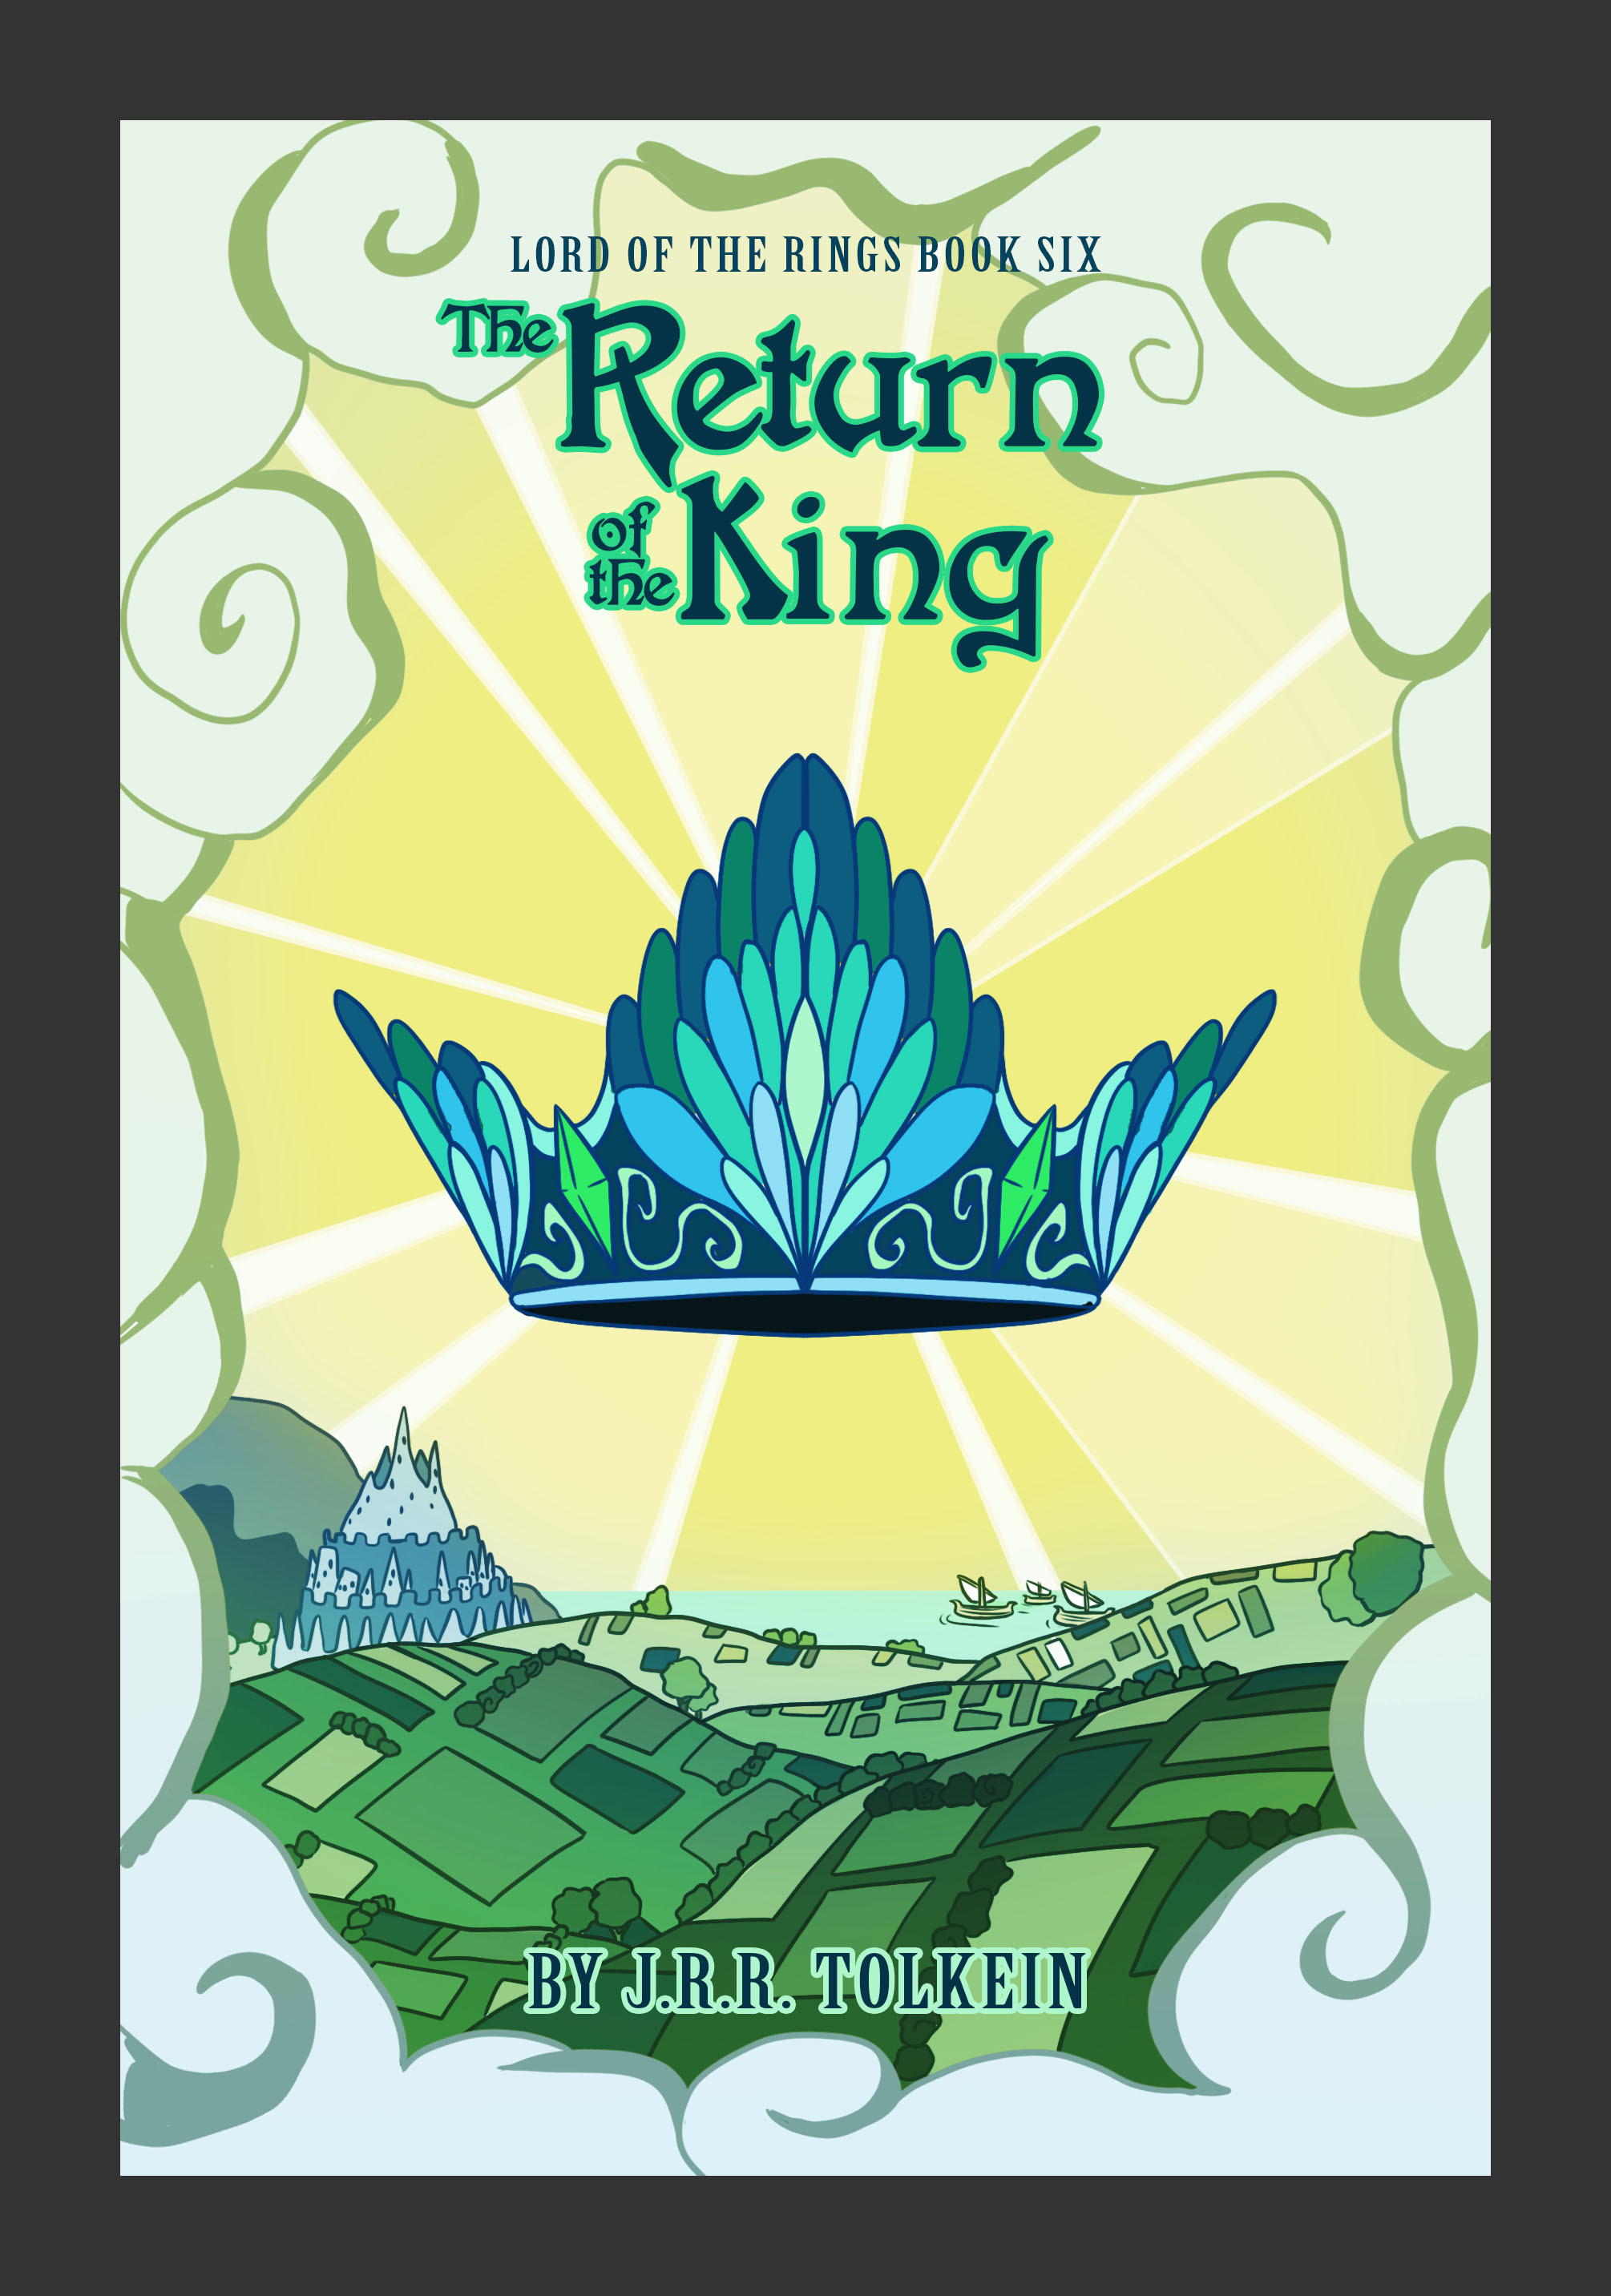 Cover for book six: The Return of the King